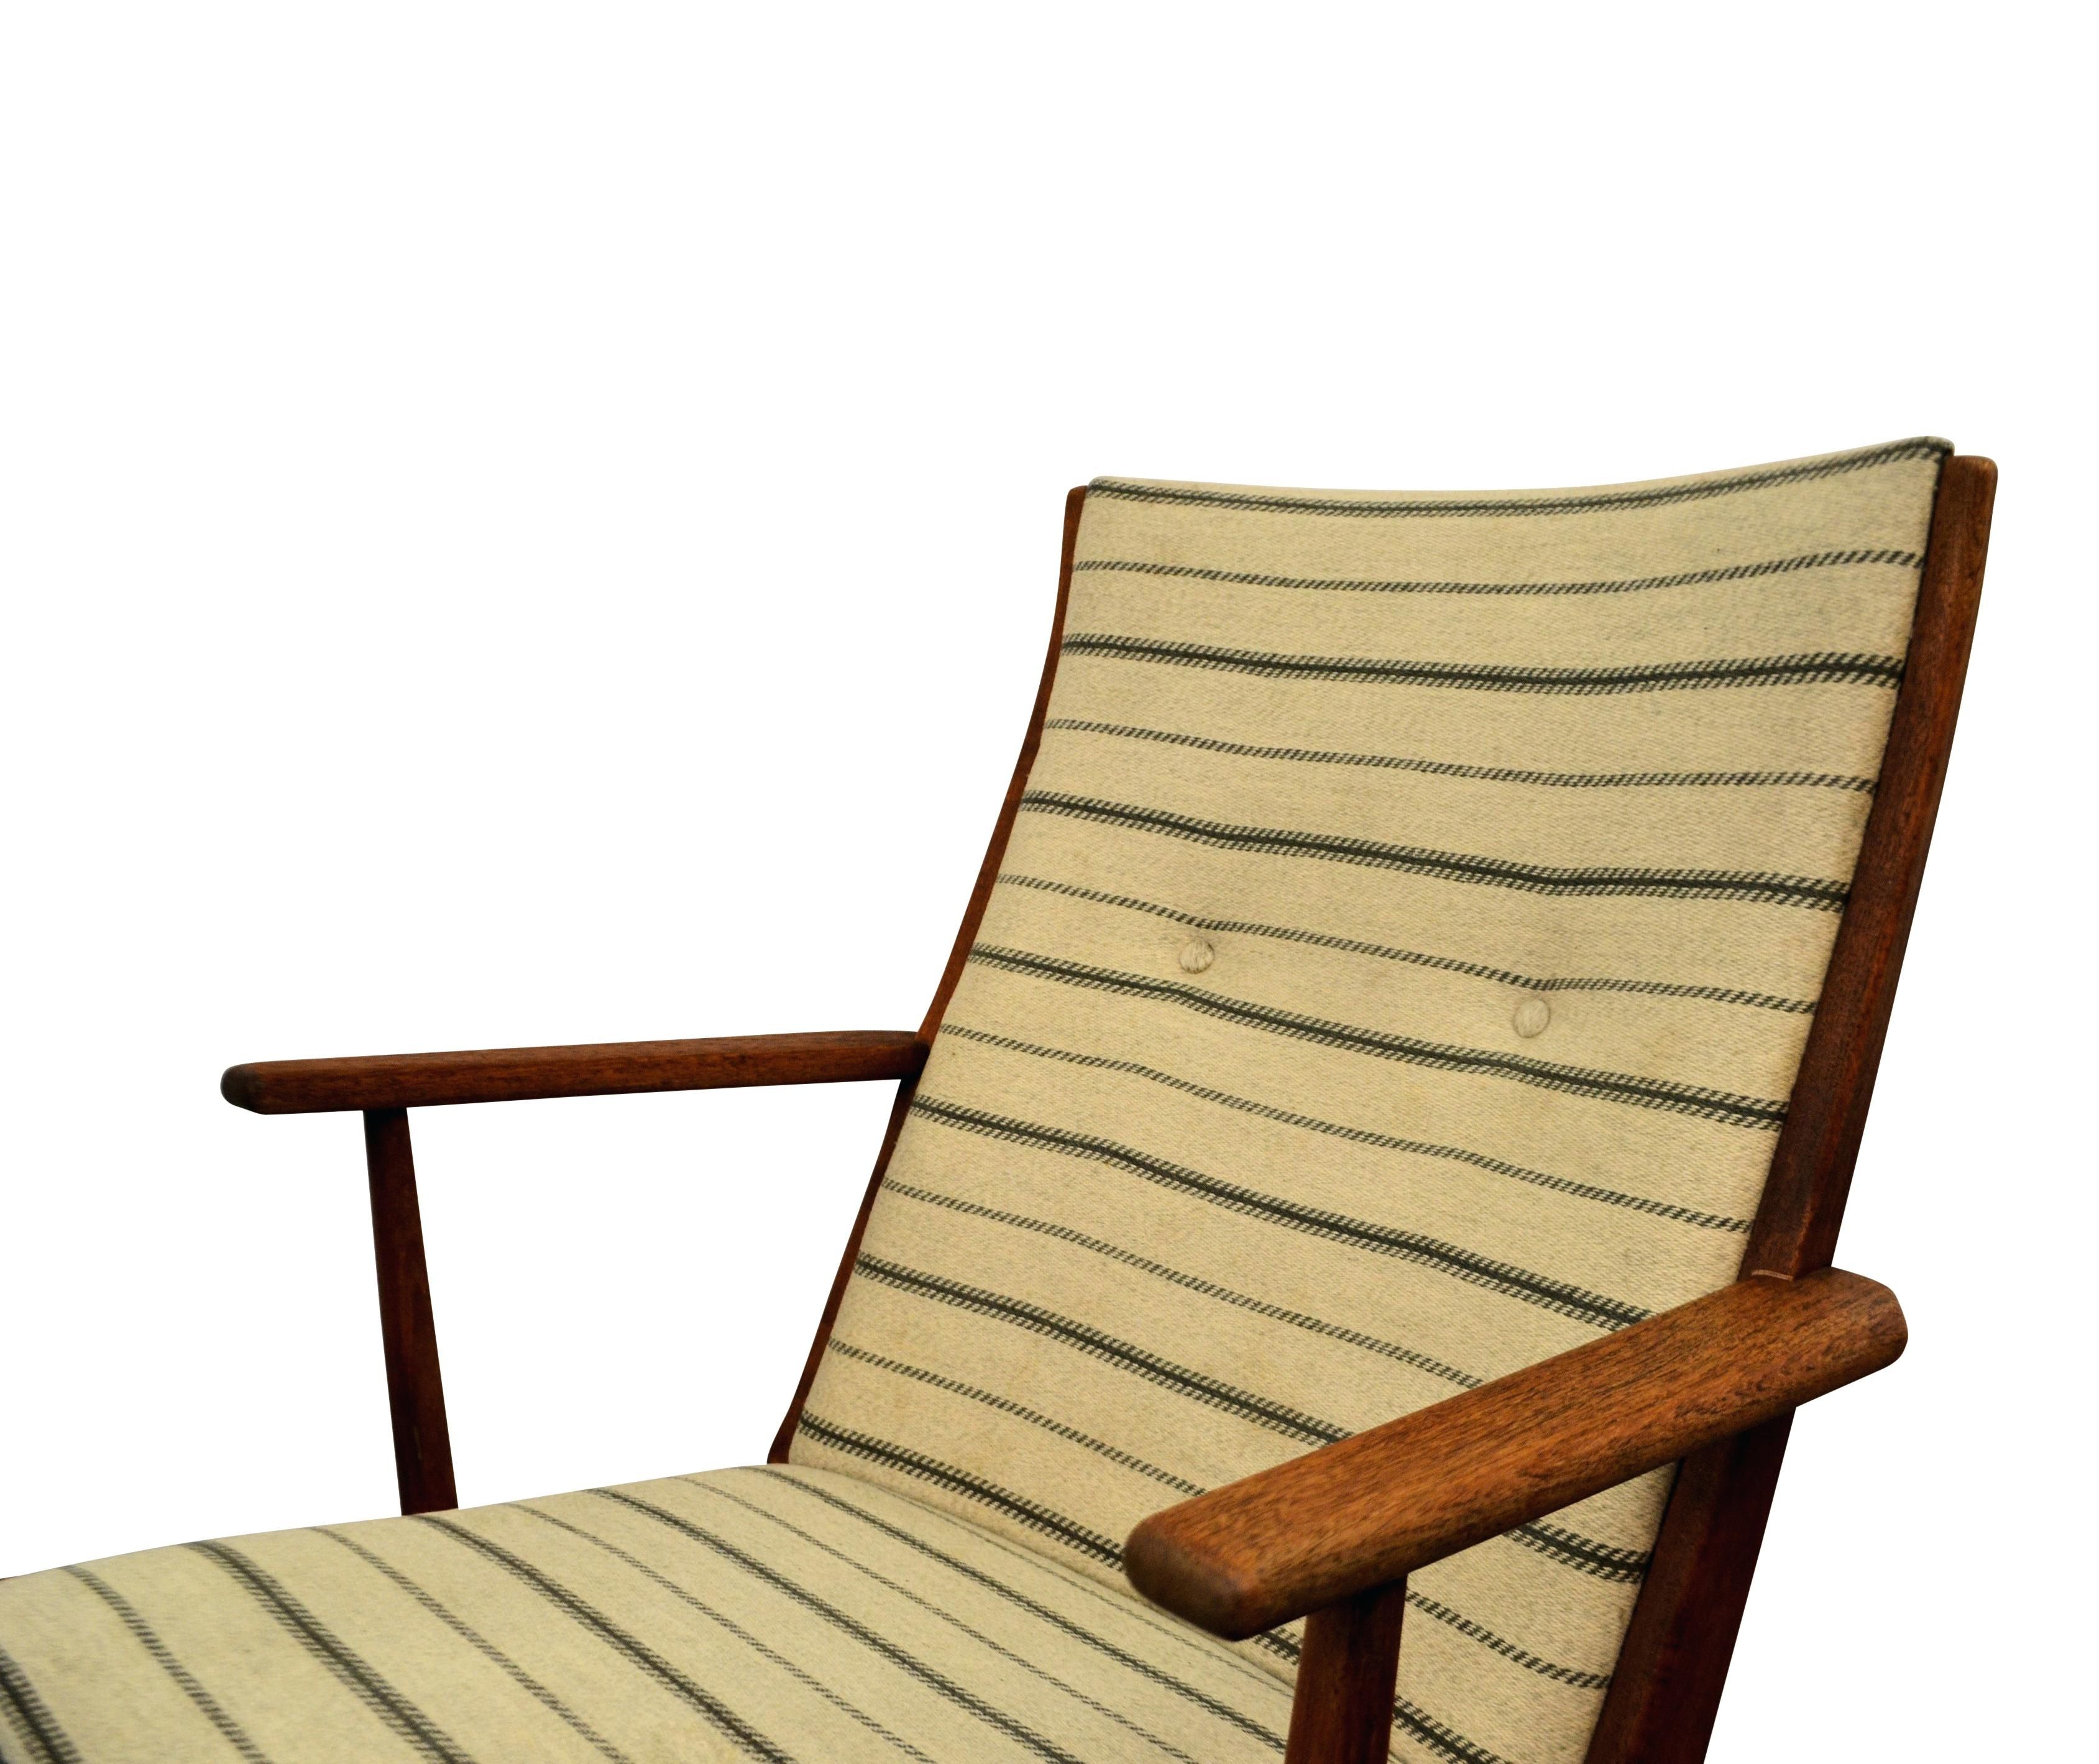 Teak Rocking Chair Chairs Sams Club Comexchange Info Outdoor Indoor Within Rocking Chairs At Sams Club (Photo 8 of 15)